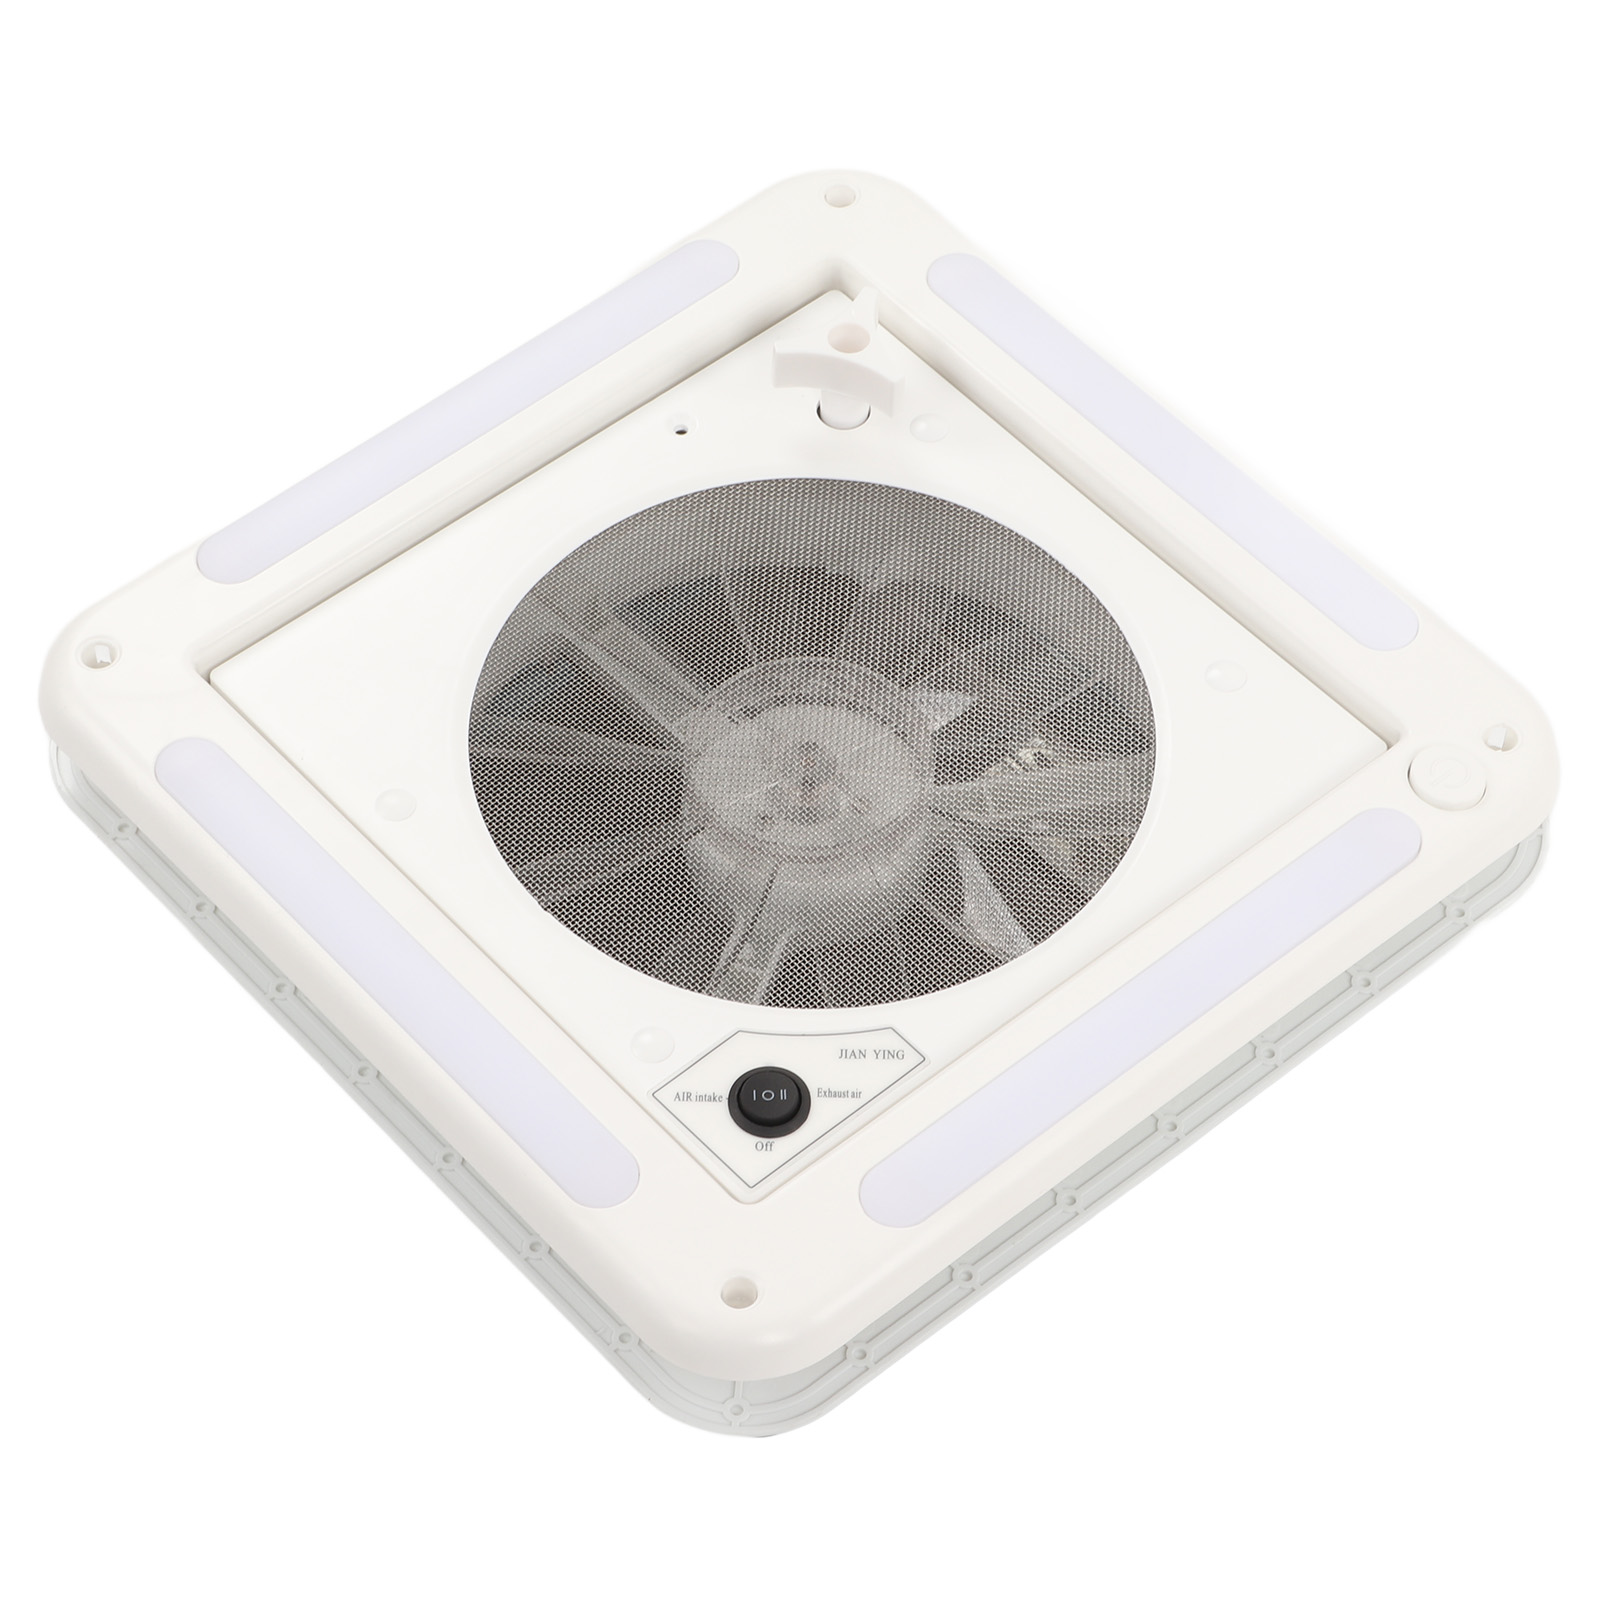 Motorhome Roof Vent Fan, 10Blades AirInletOutlet Low Noise Bathroom  RoofExhaust Fan DualMode For Van For Yachts 